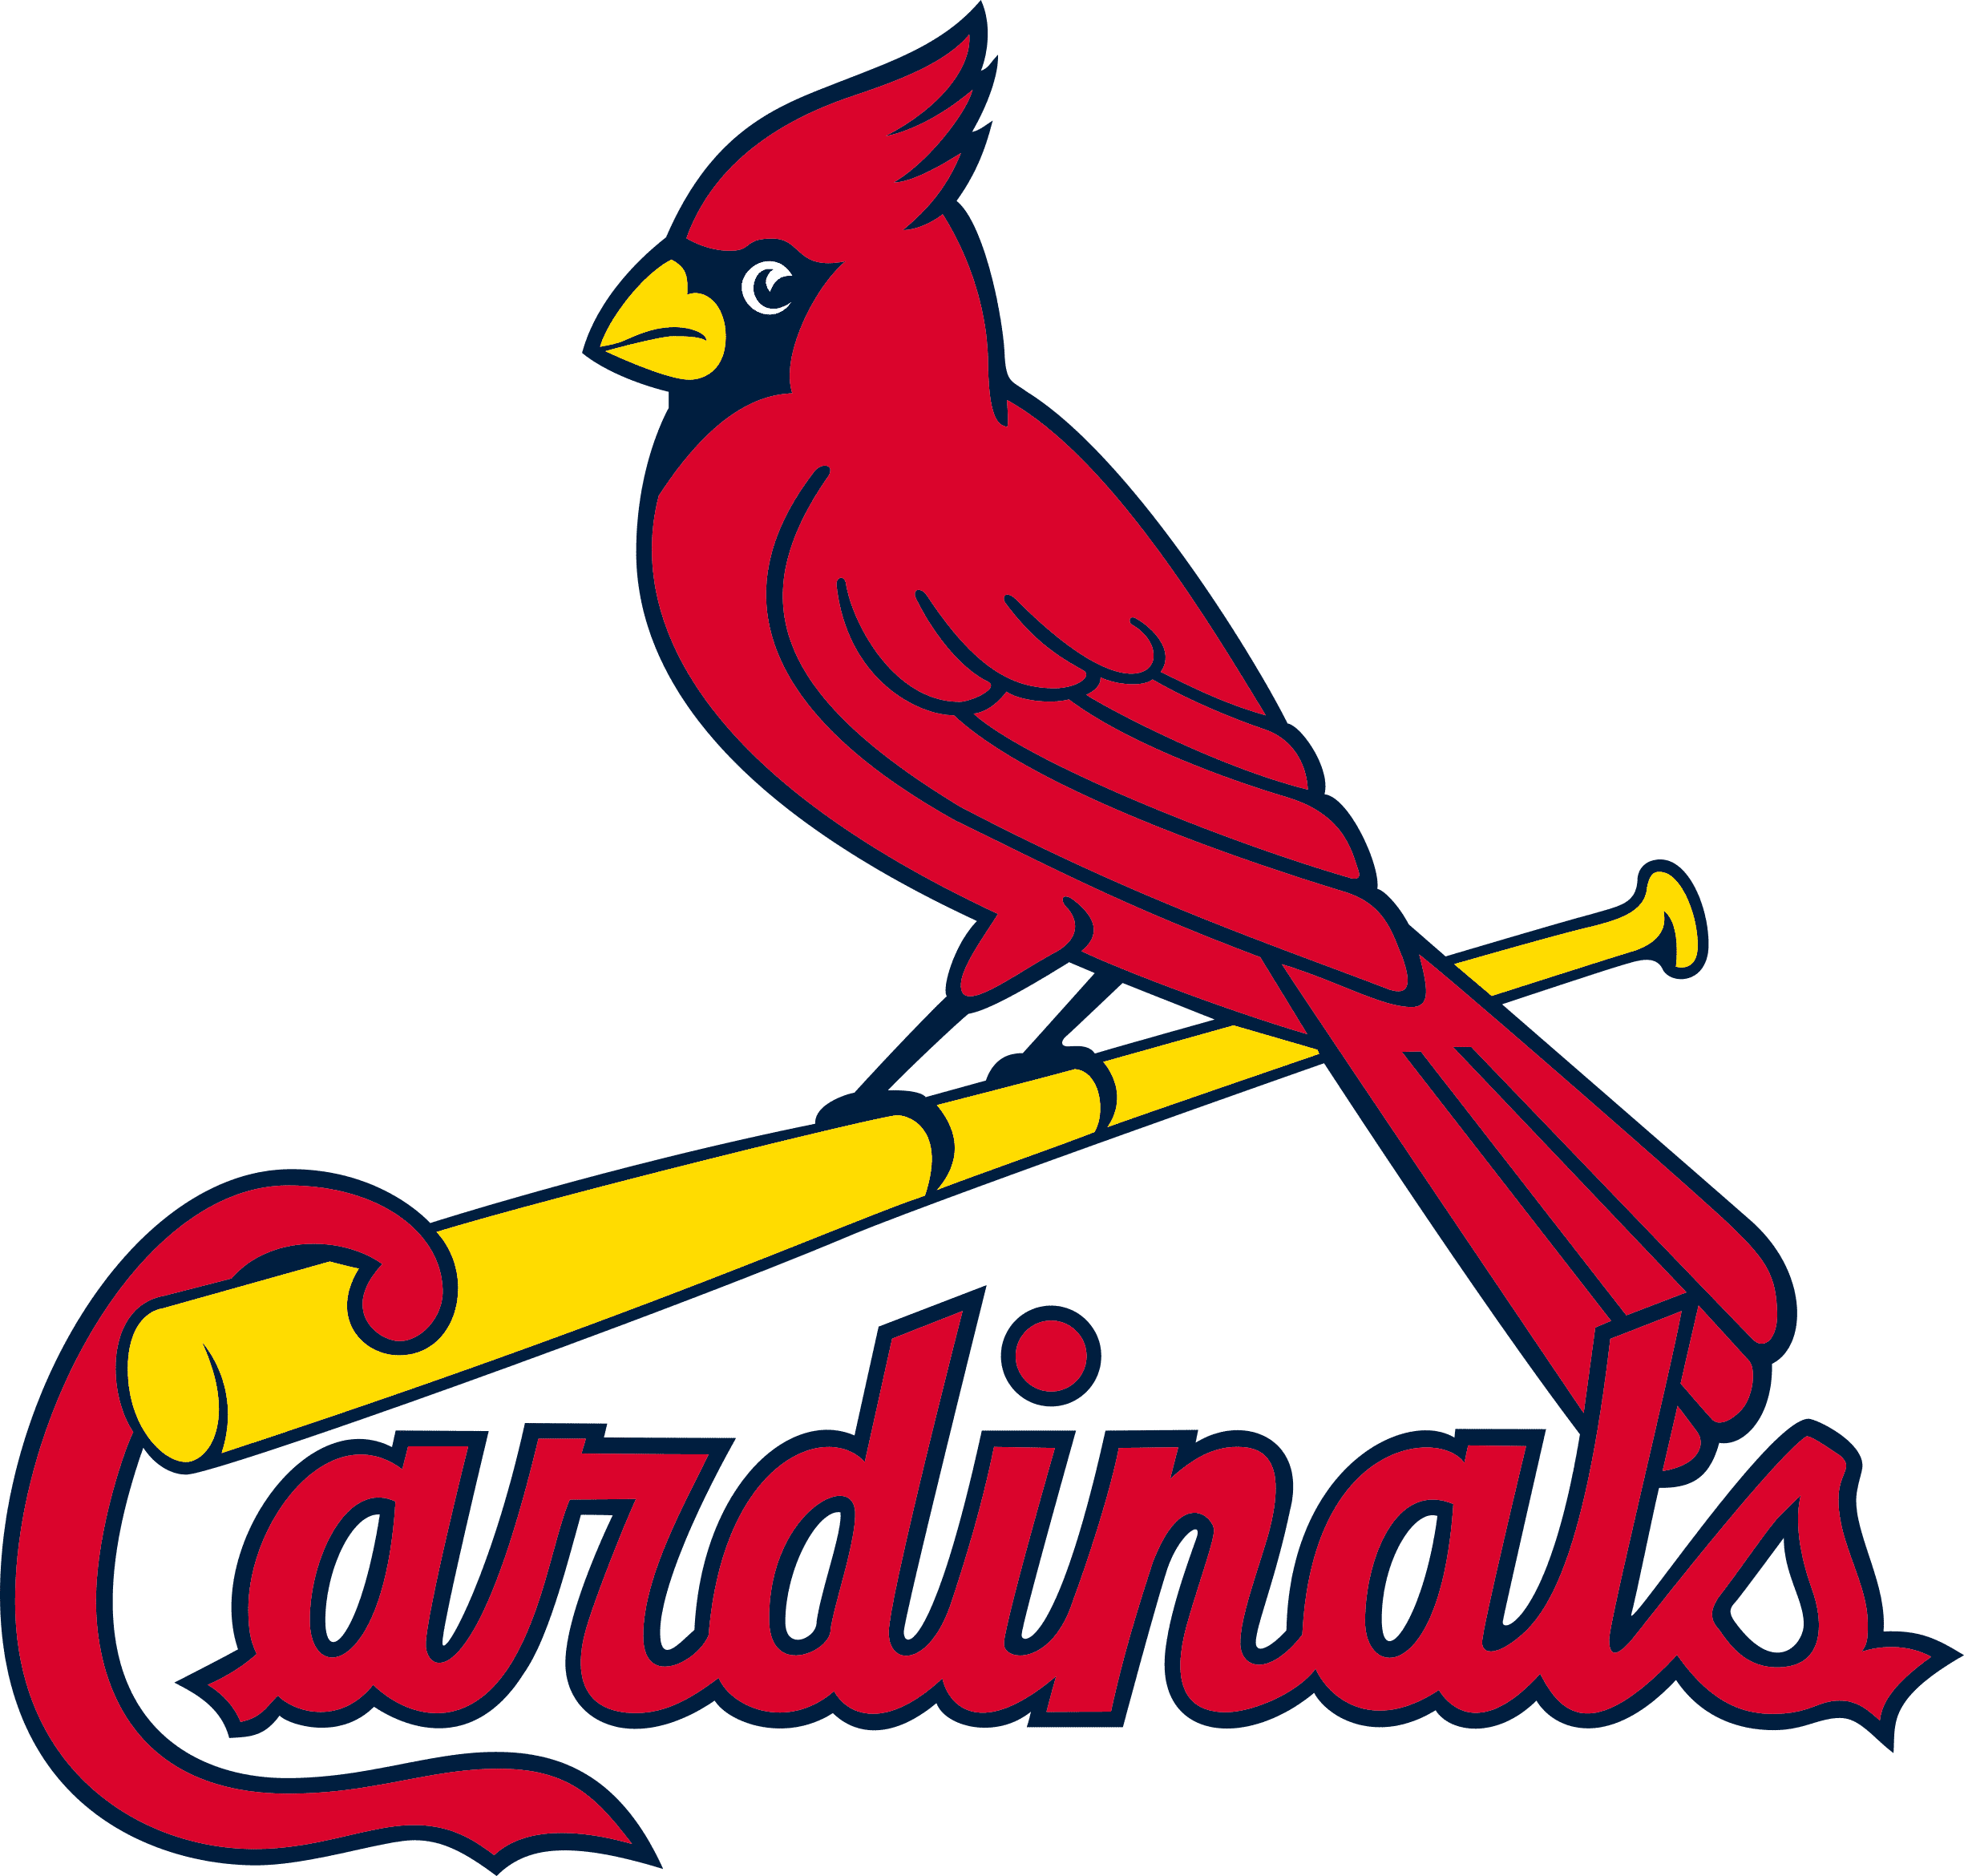 St. Louis Baseball SVG PNG Cutting File Graphic by SVG store